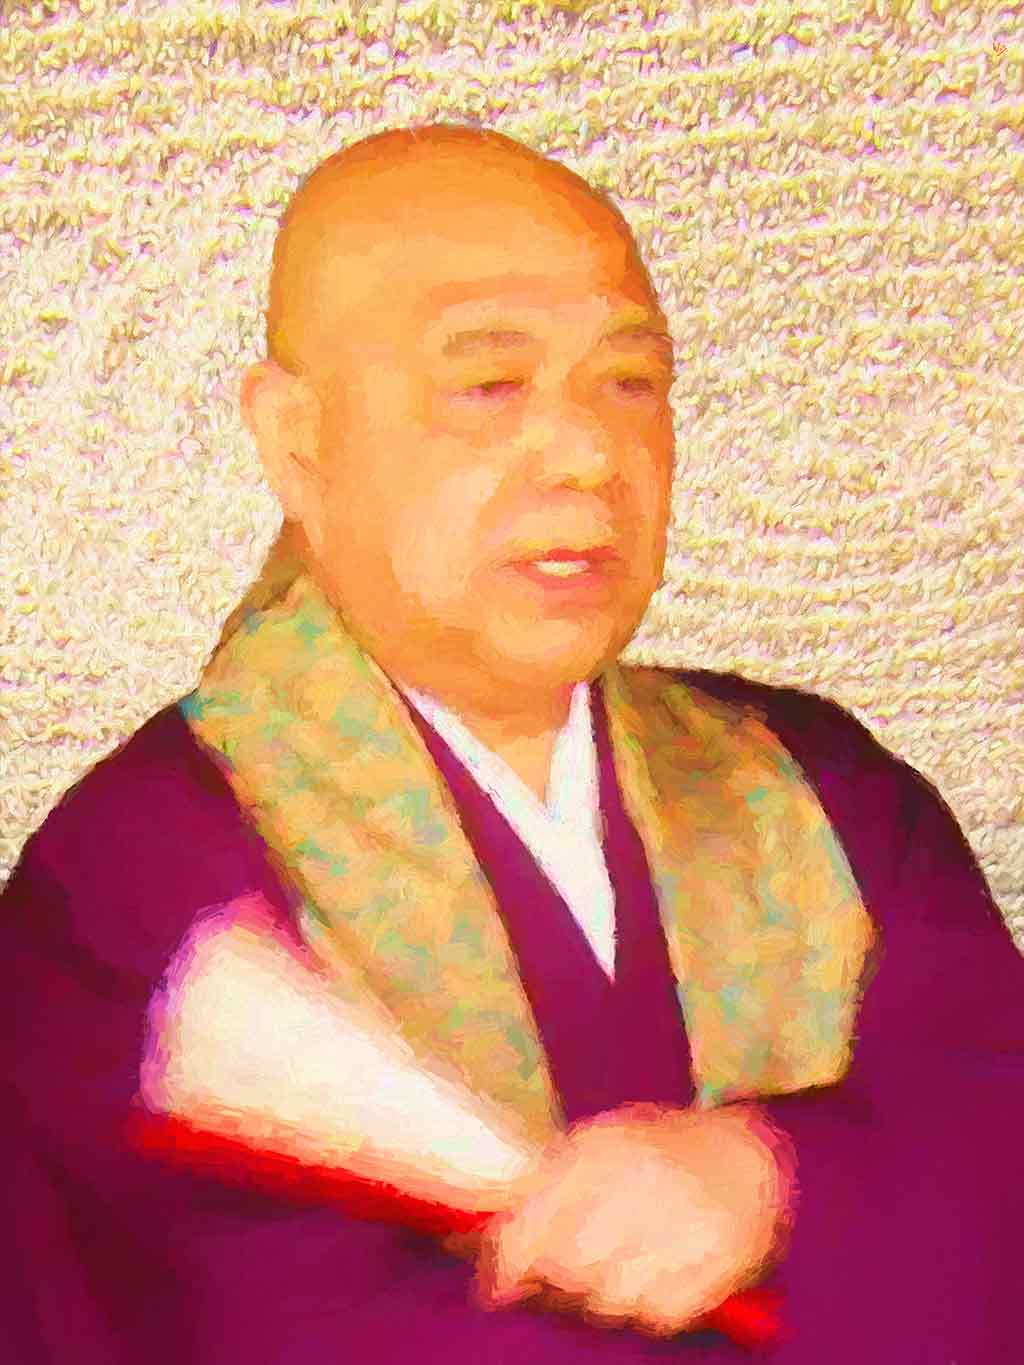 Art canvas print of a Zen Master, capturing serene wisdom and deep contemplation in his expression.